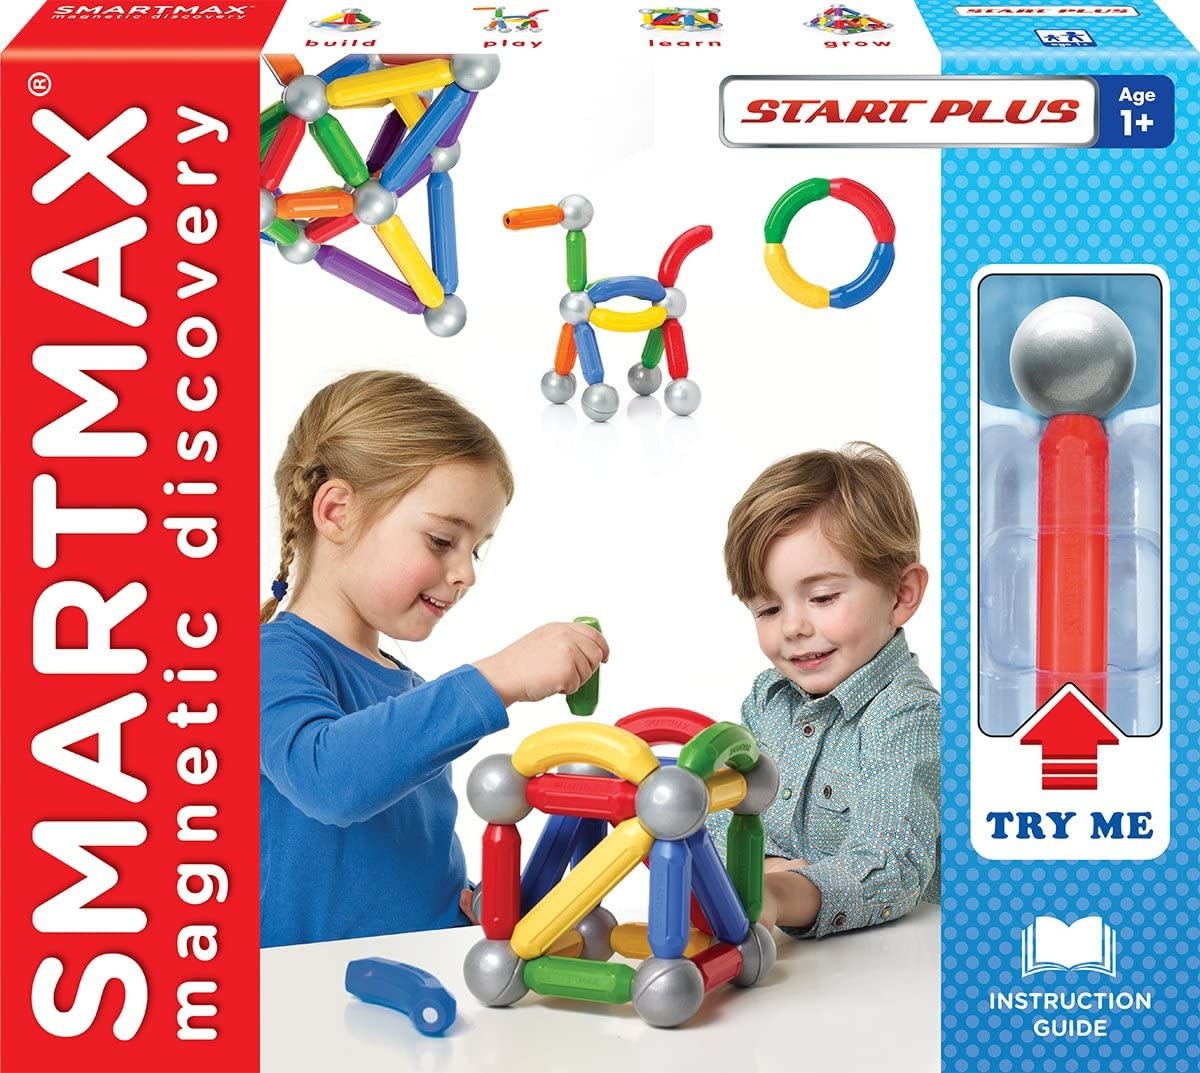 SmartMax - Castle Toys and Games